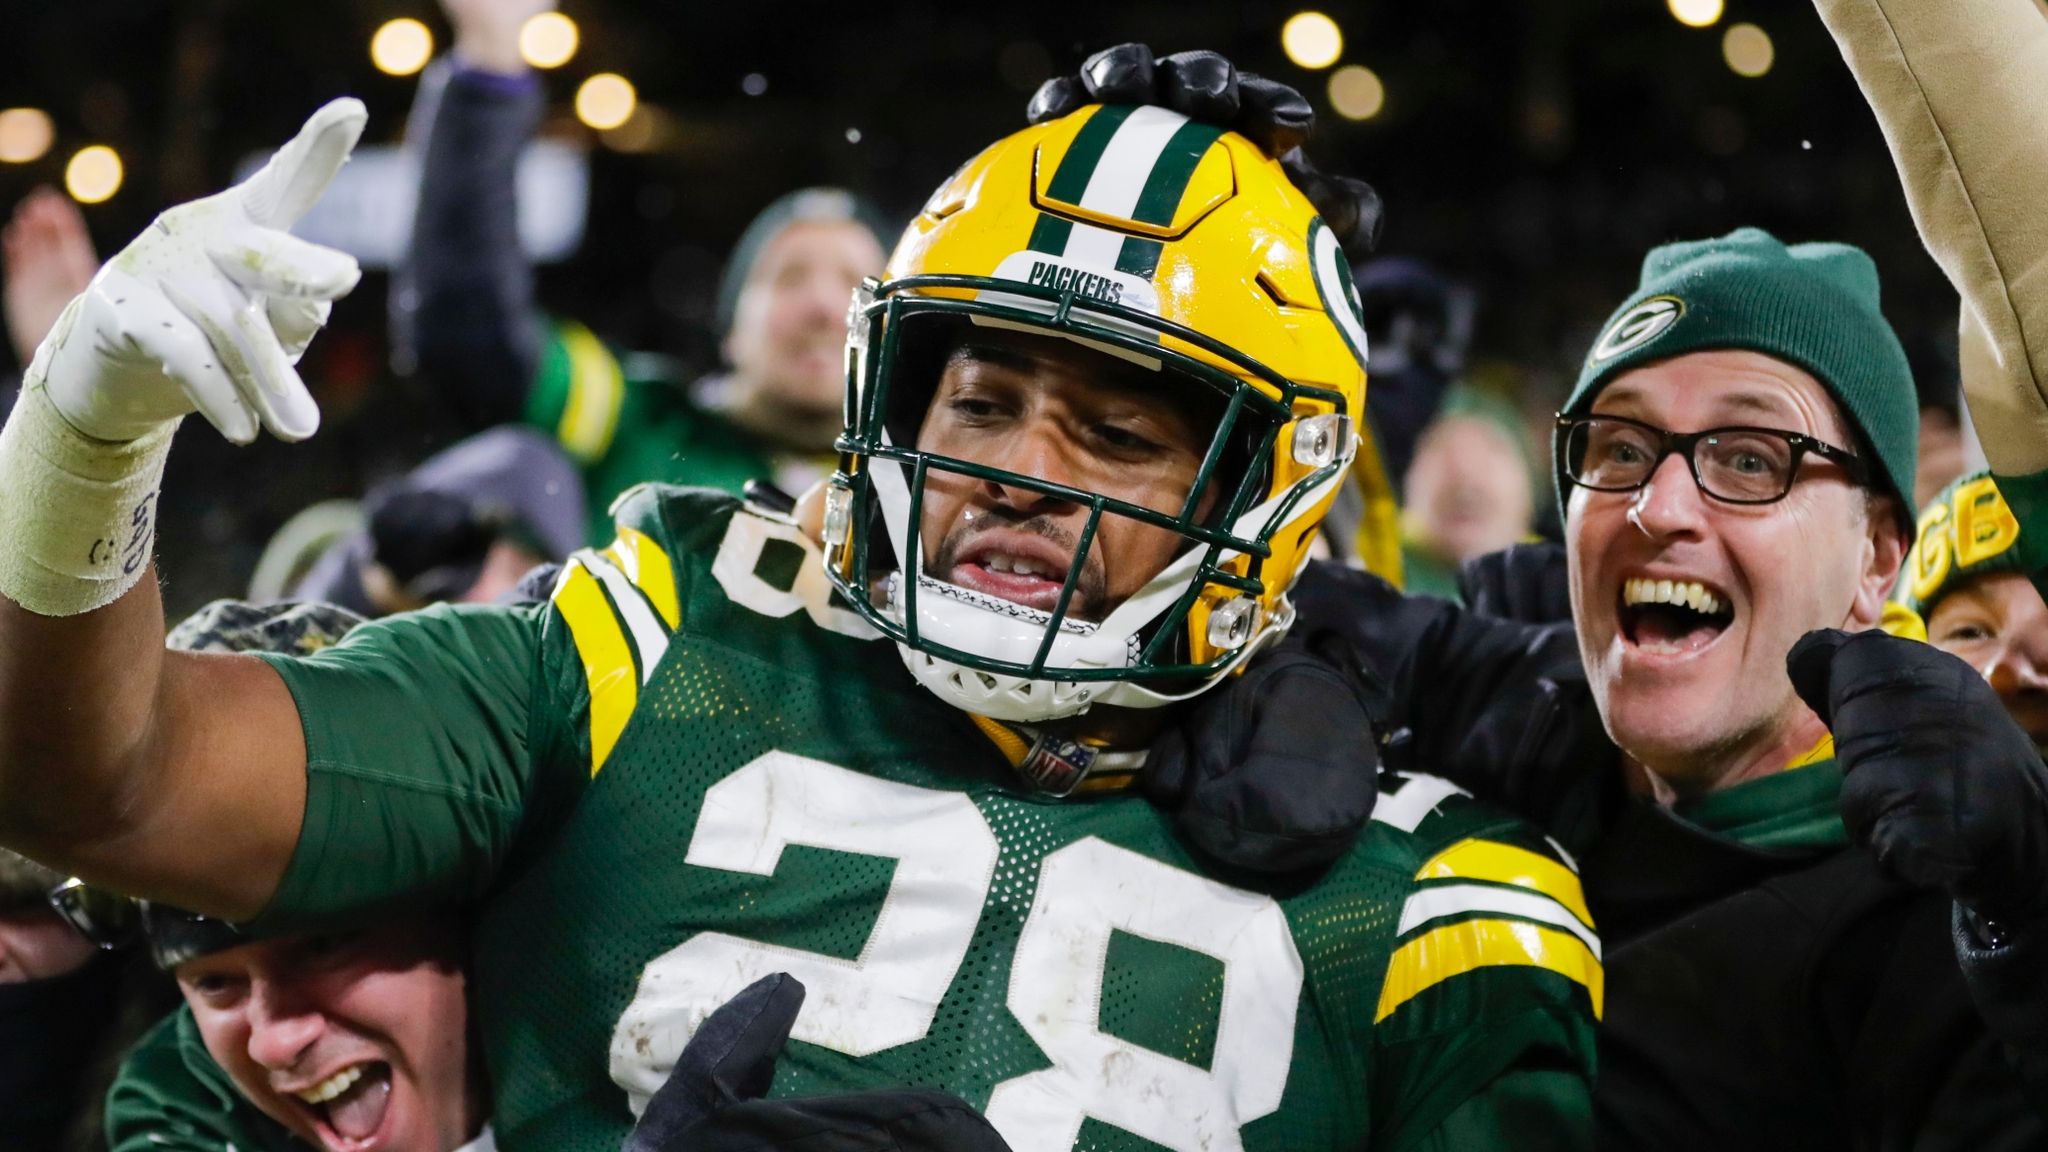 AJ Dillon wears overalls in Green Bay cold, scores two touchdowns